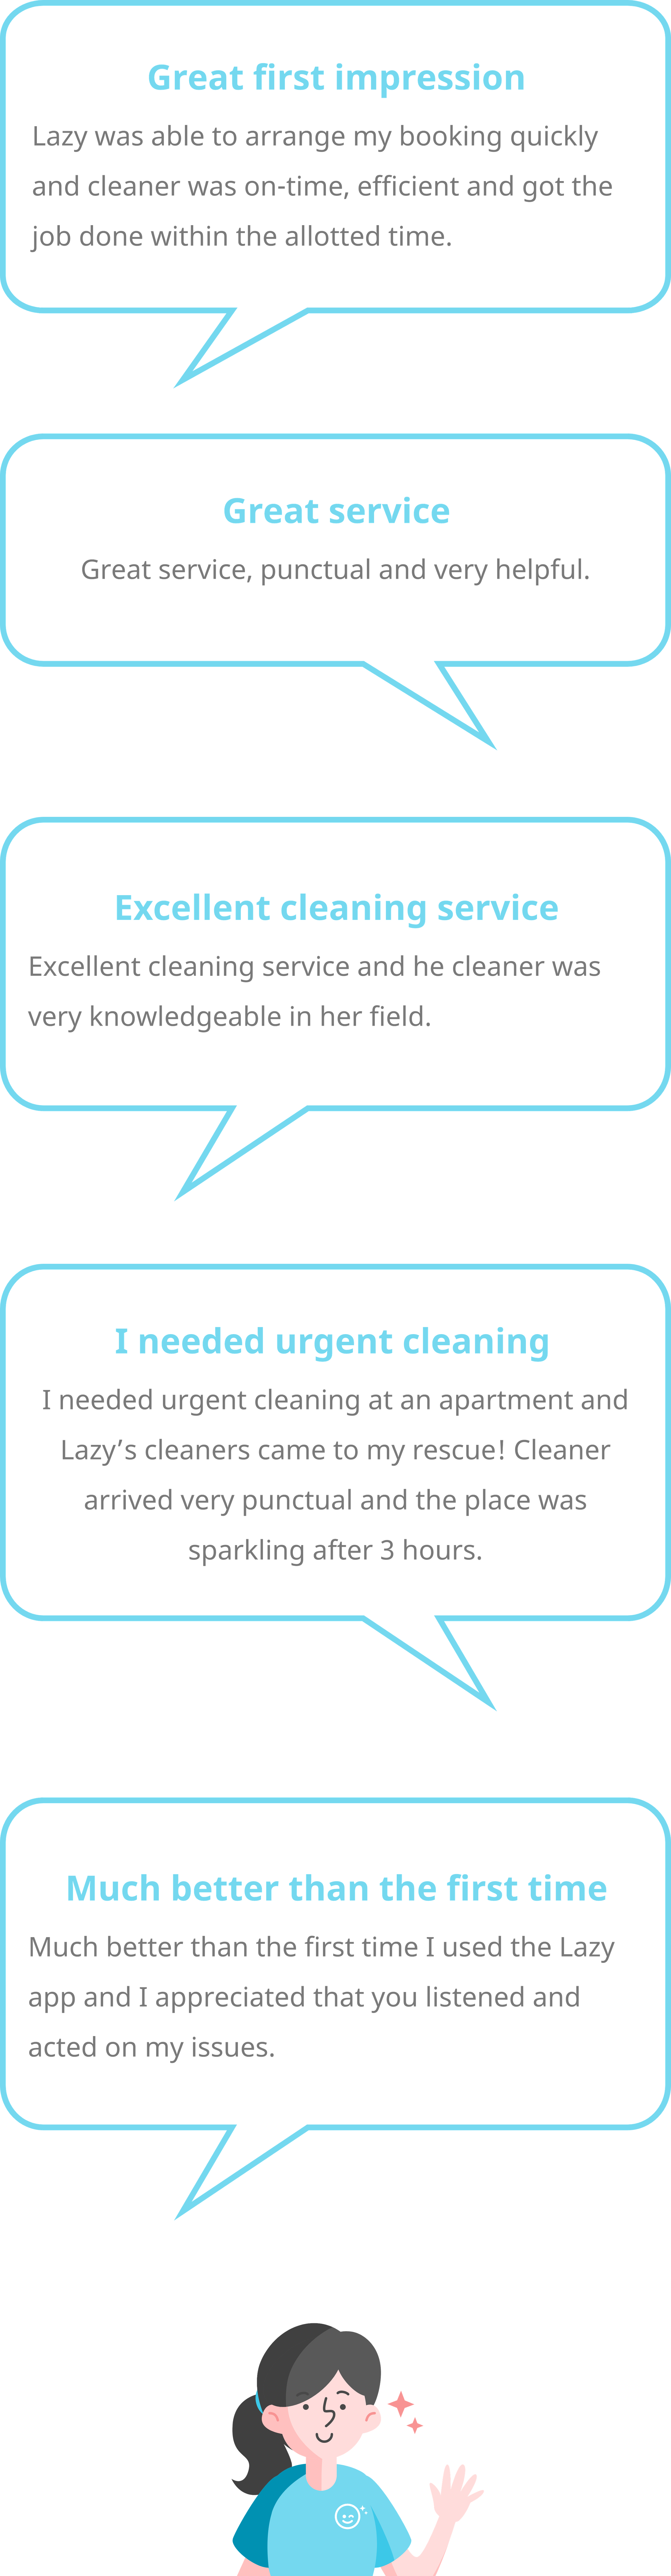 Lazy - Home cleaning services - About us